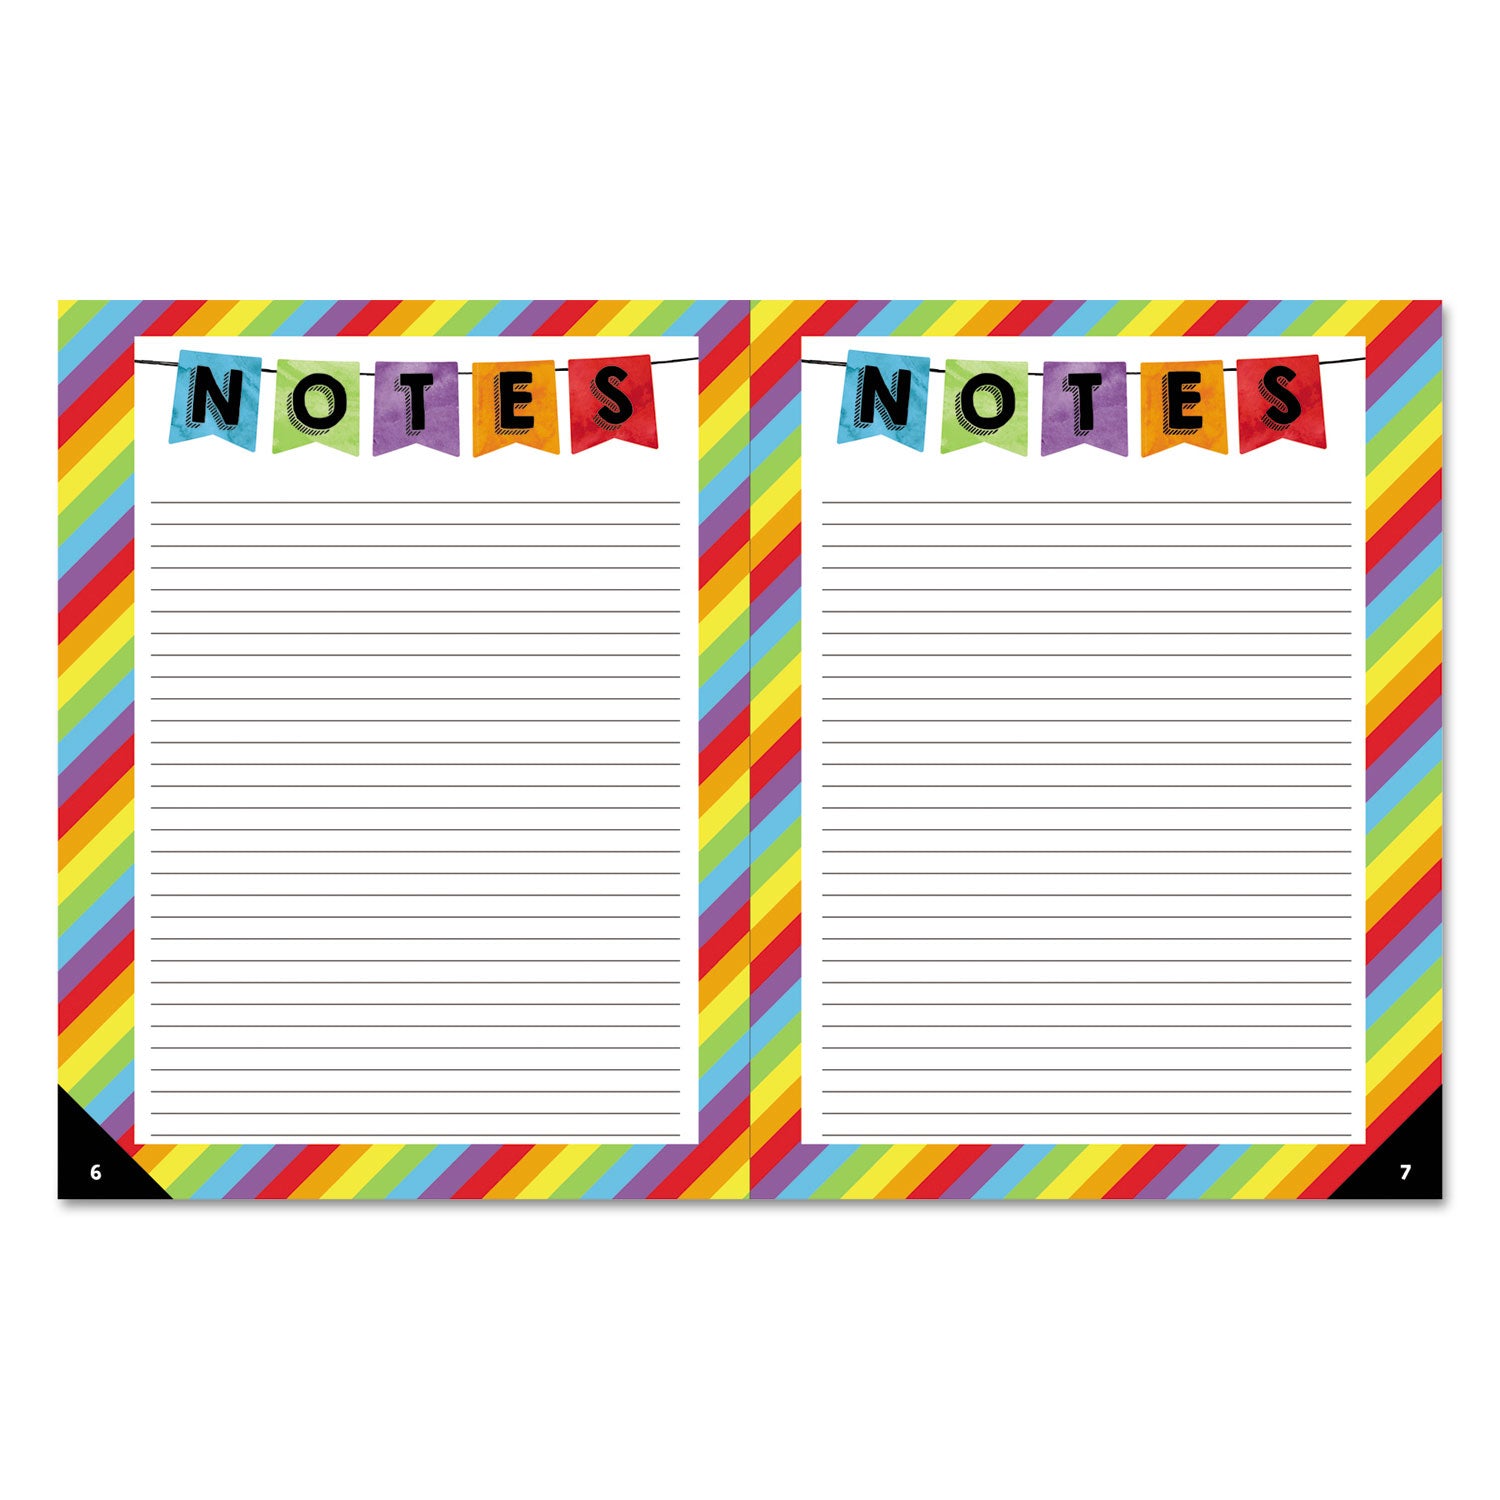 teacher-planner-weekly-monthly-two-page-spread-seven-classes-1088-x-838-balloon-theme-black-cover_cdp105000 - 5